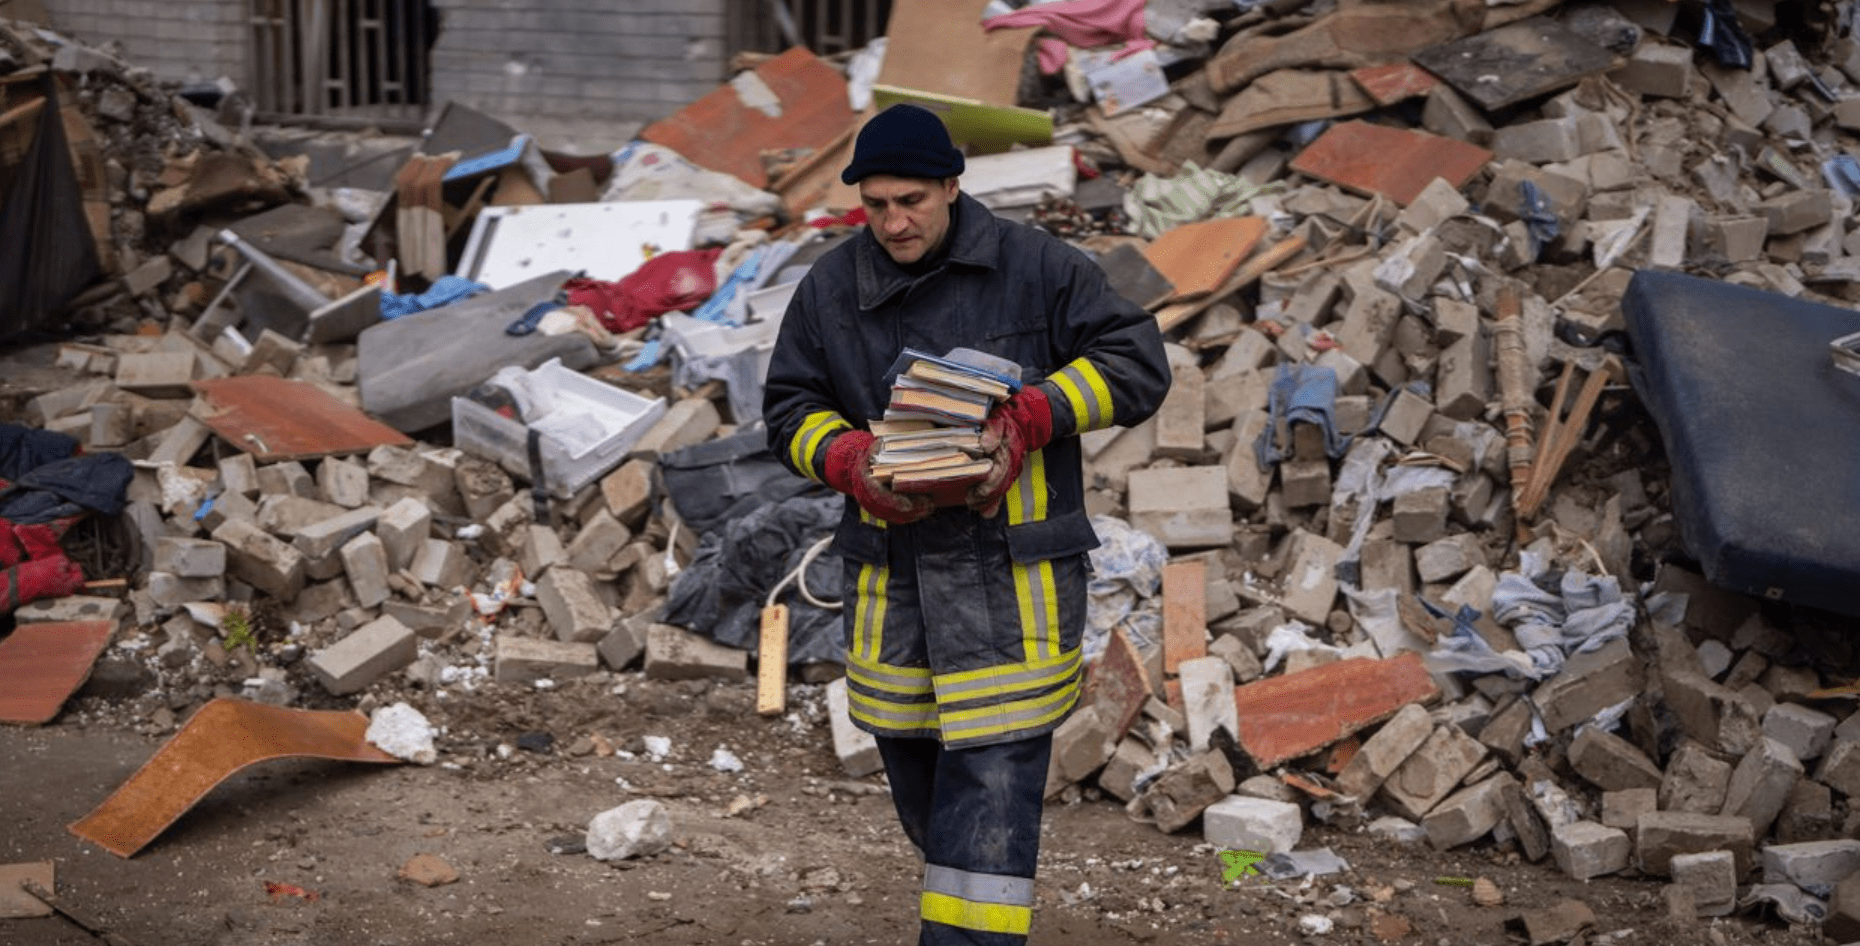 fire fighter removing books from wreckage